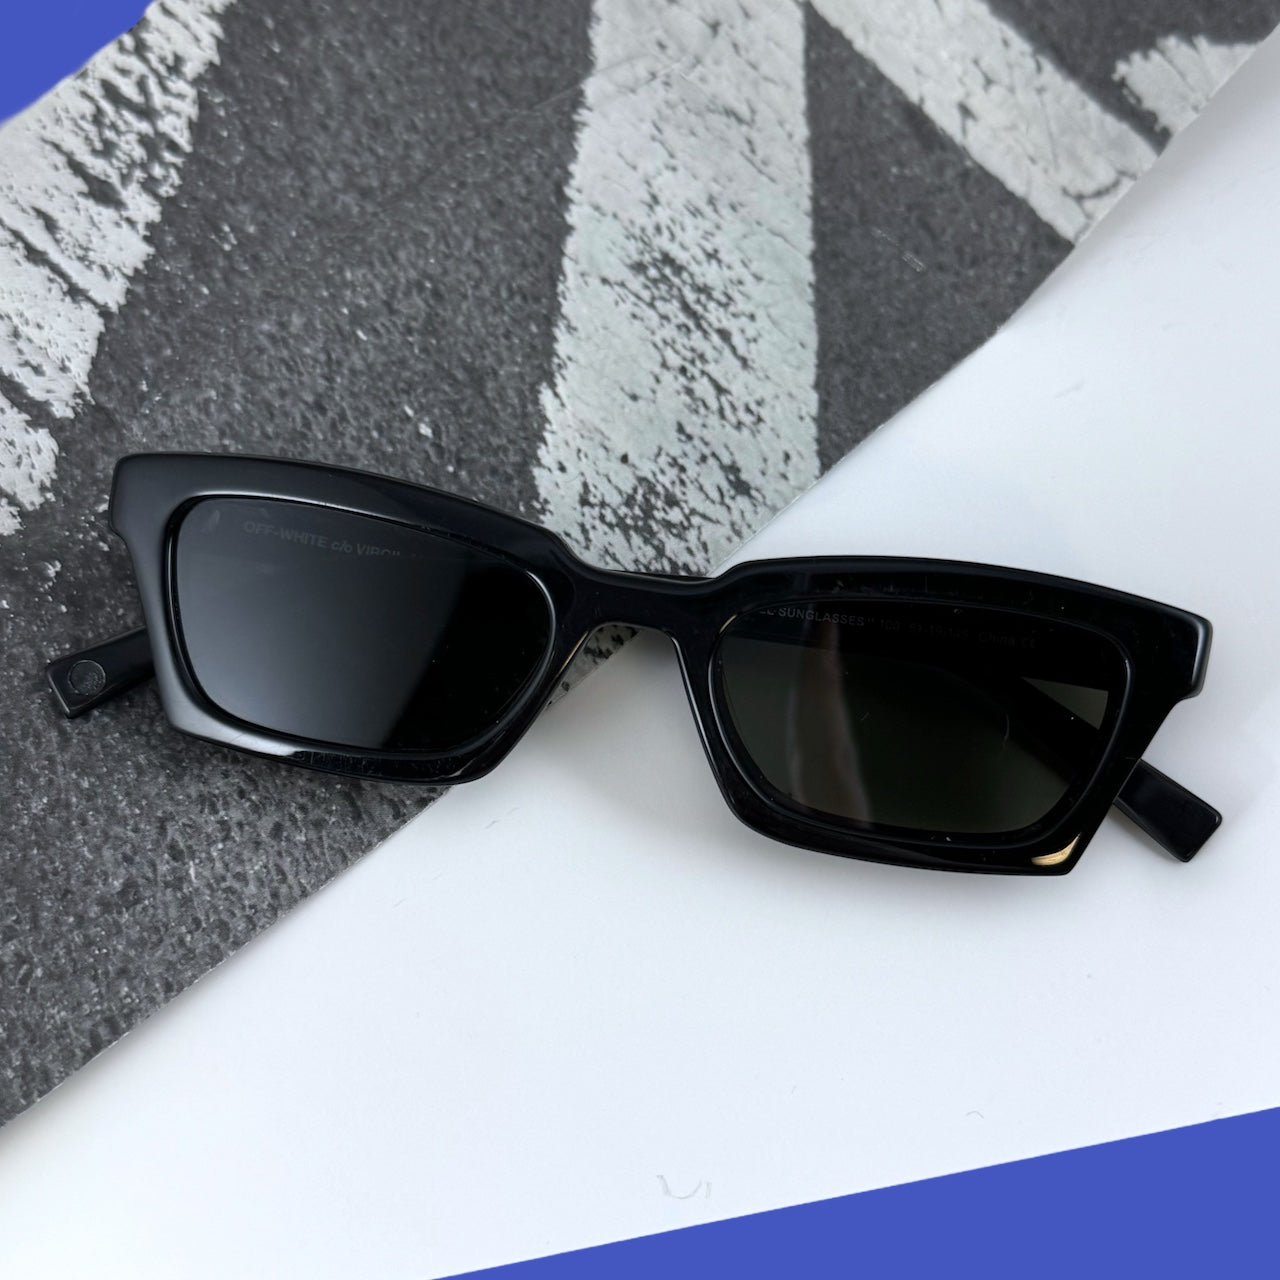 OFF-WHITE x Warby Parker Small Sunglasses in Black